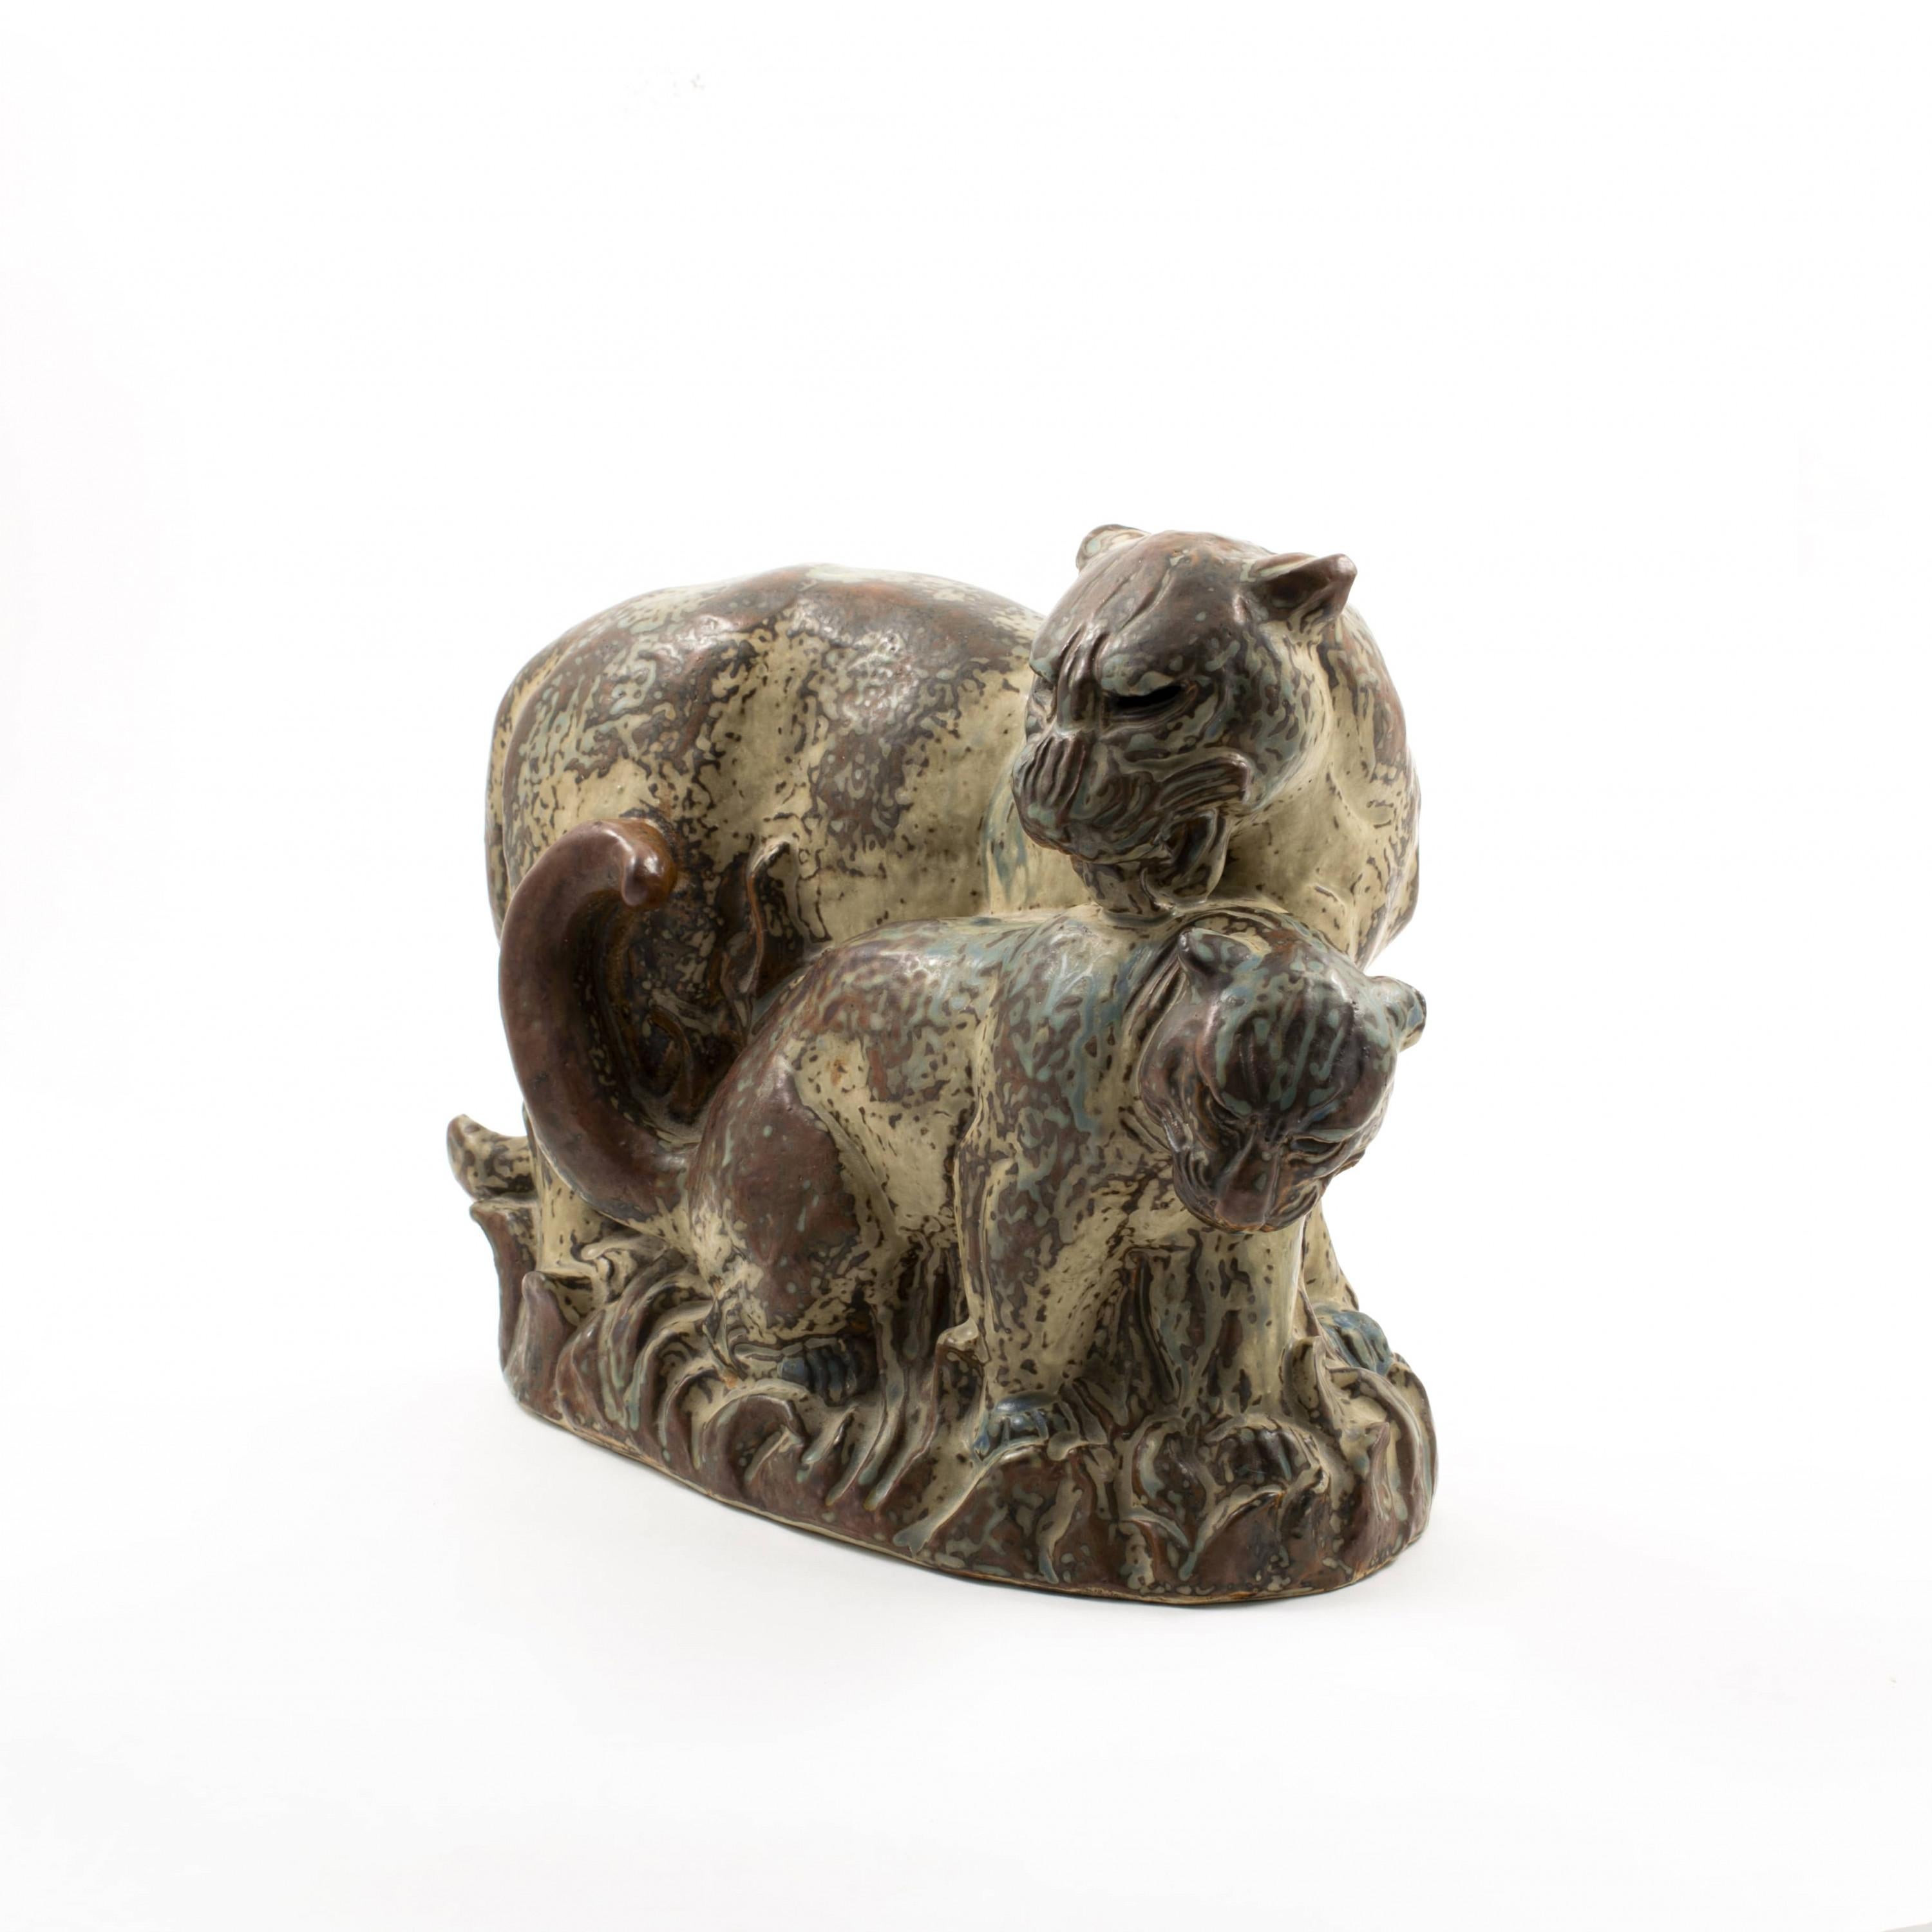 Knud Kyhn for Royal Copenhagen.
Glazed stoneware figurine of a panther with young cub, decorated in a stunning sung glaze.
Signed KK (Knud Kyhn) and Royal Copenhagen stamp, No. 20265. Denmark 1950's.

Knud Kyhn (1880-1969) was one of Denmark's